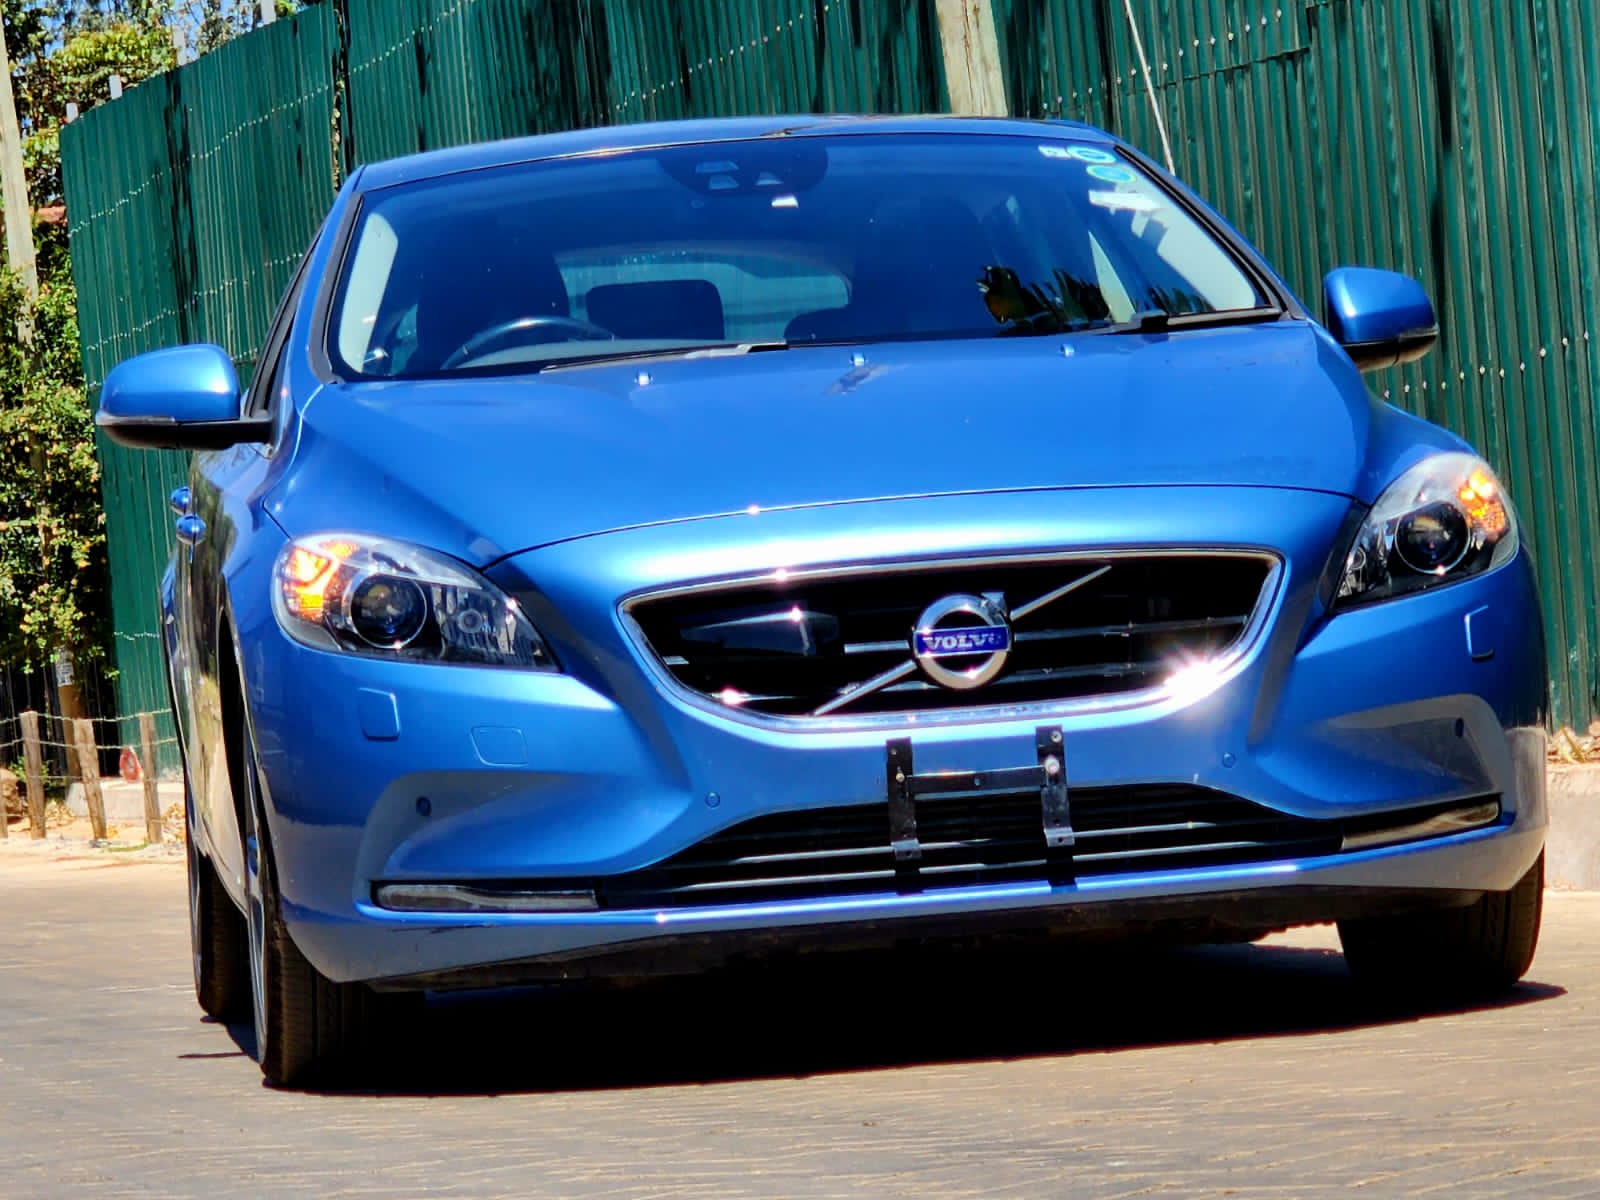 Volvo V40 D4 2015 with SUNROOF CHEAPEST You Pay 30% DEPOSIT TRADE IN OK